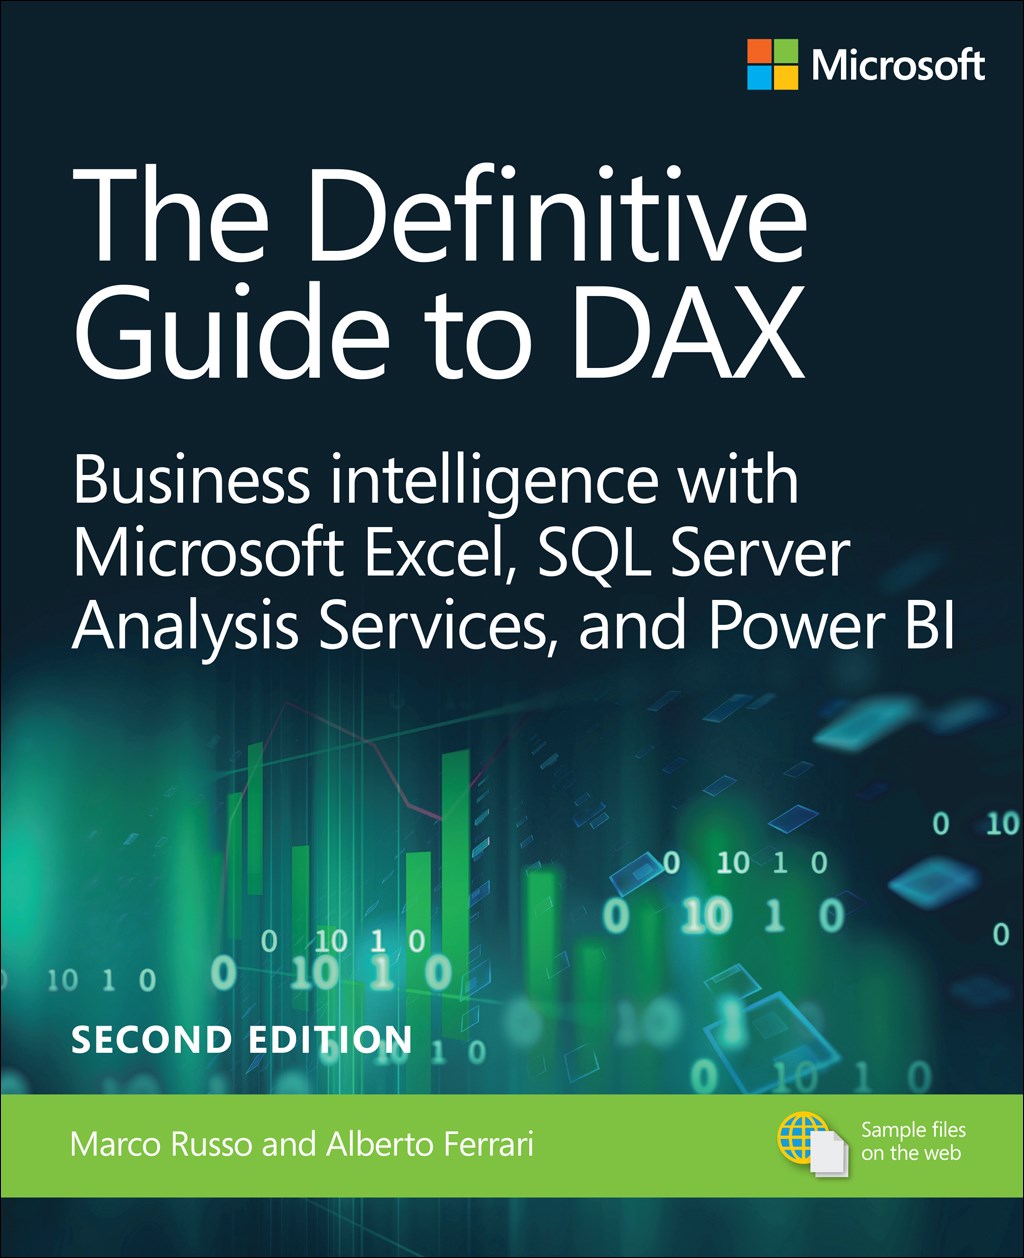 Definitive Guide to DAX, The Business intelligence for Microsoft Power